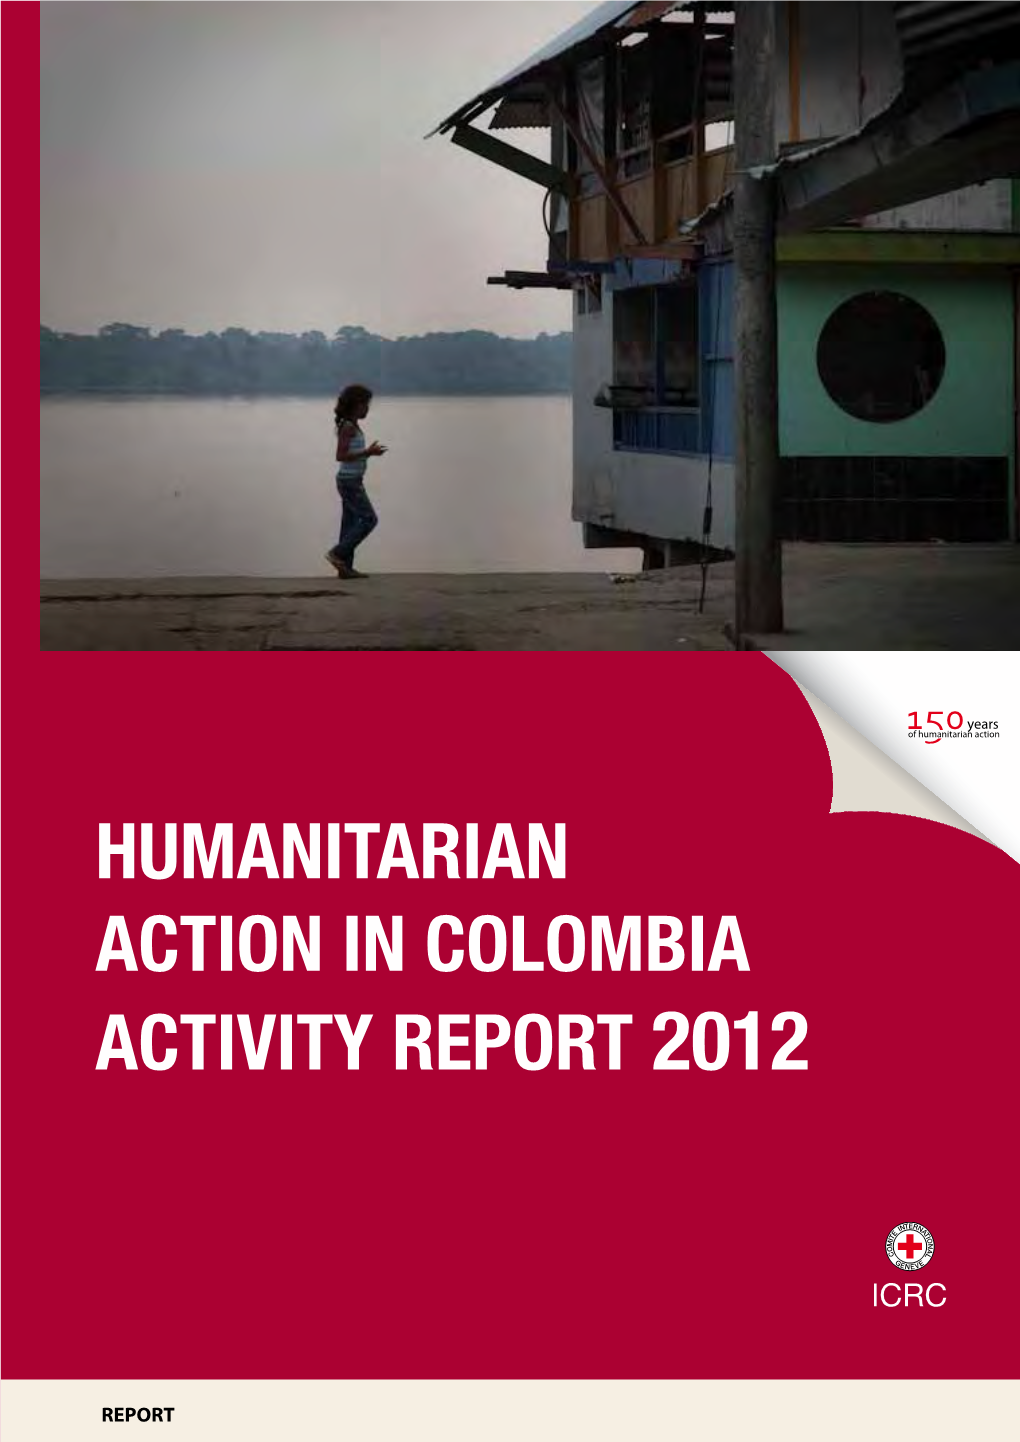 Humanitarian Action in Colombia Activity Report 2012